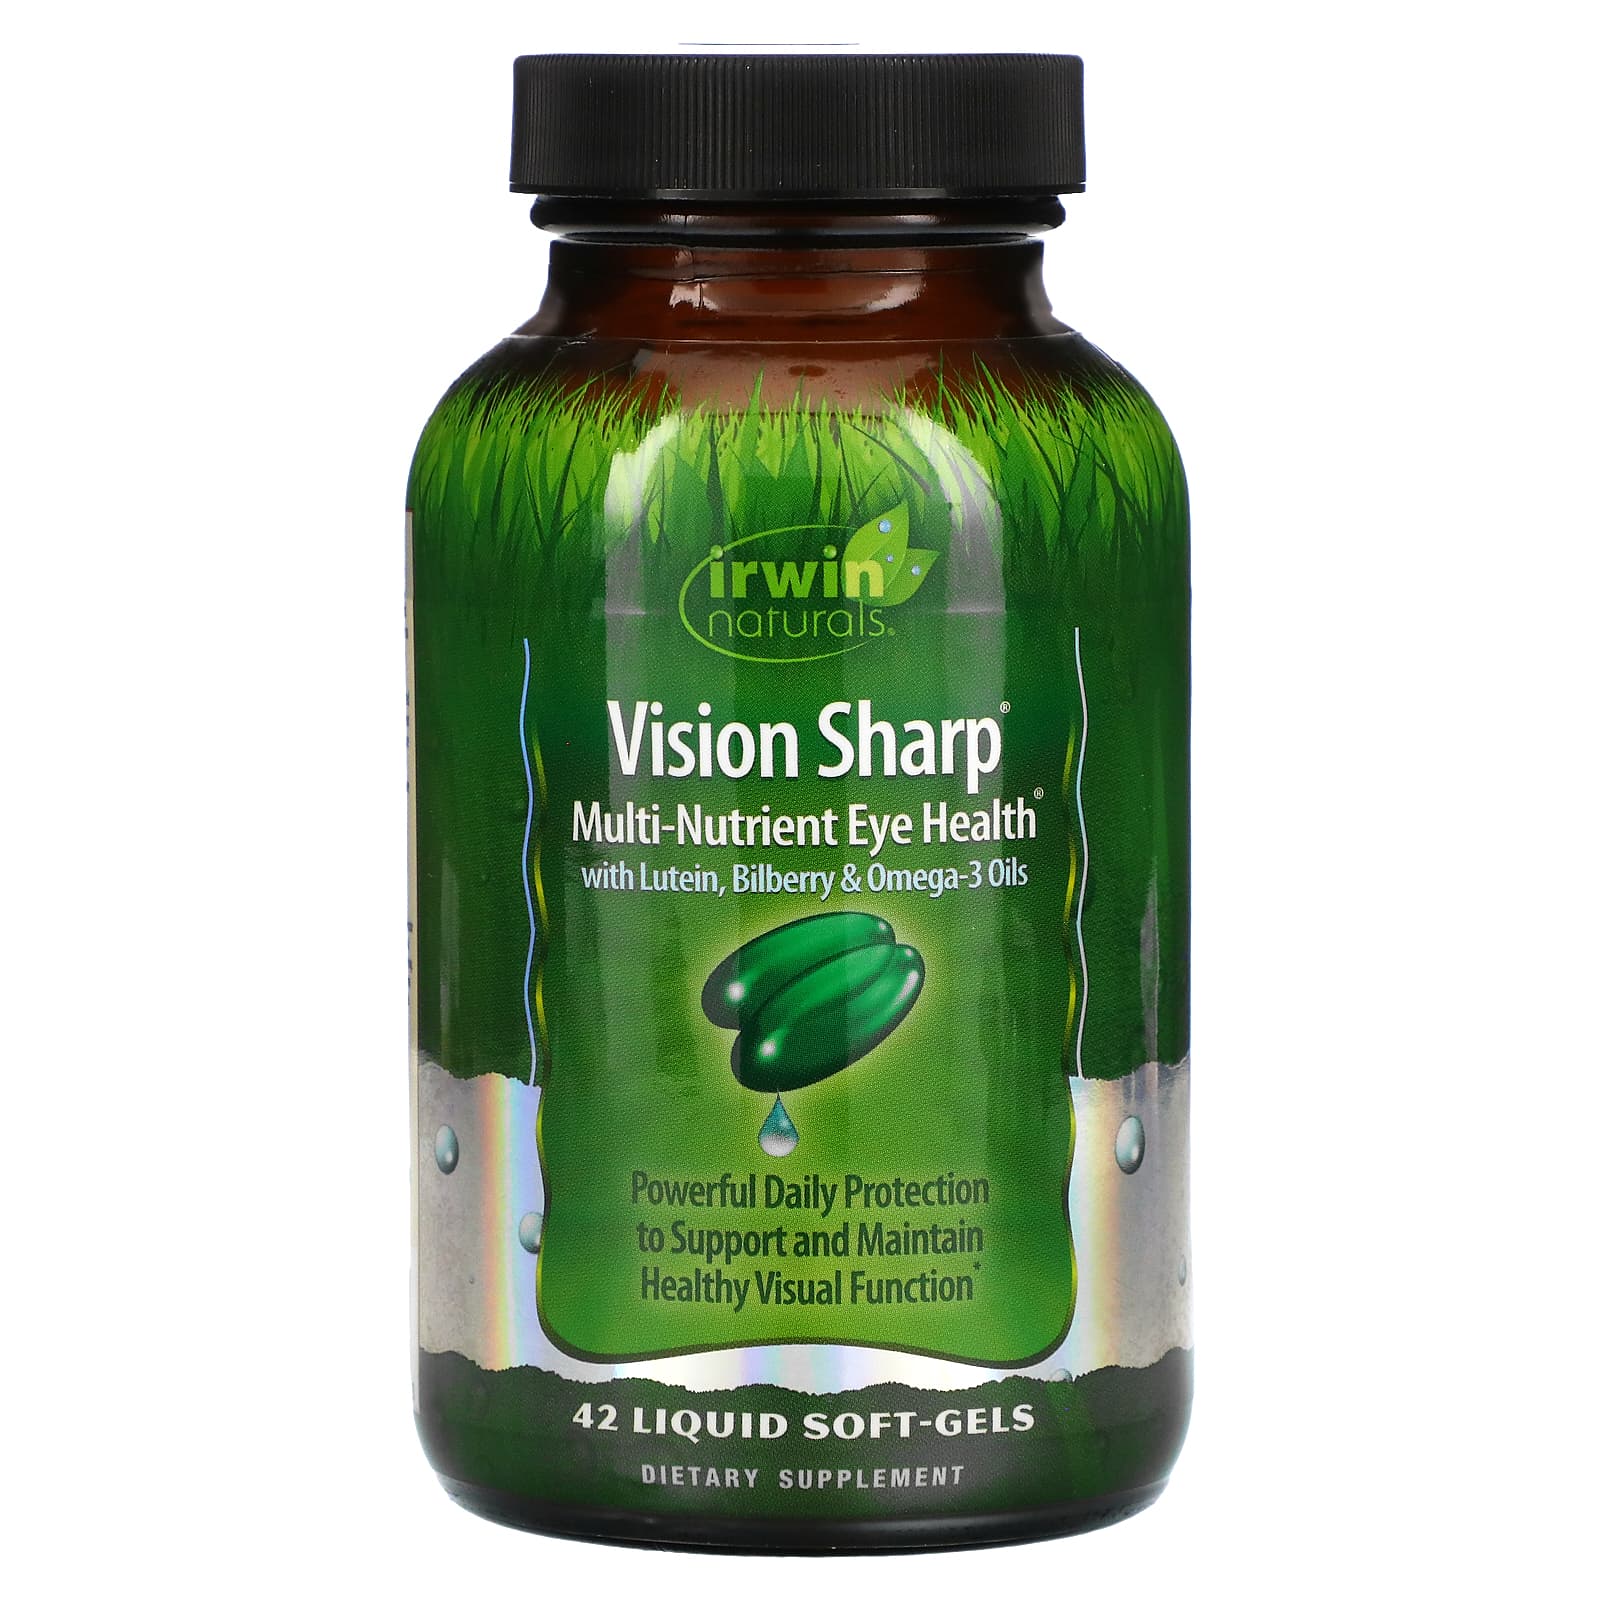 Irwin Naturals Vision Sharp Multi-Nutrient Eye Health With Lutein, Bilberry And Omega-3s - 42 Liquid Softgels